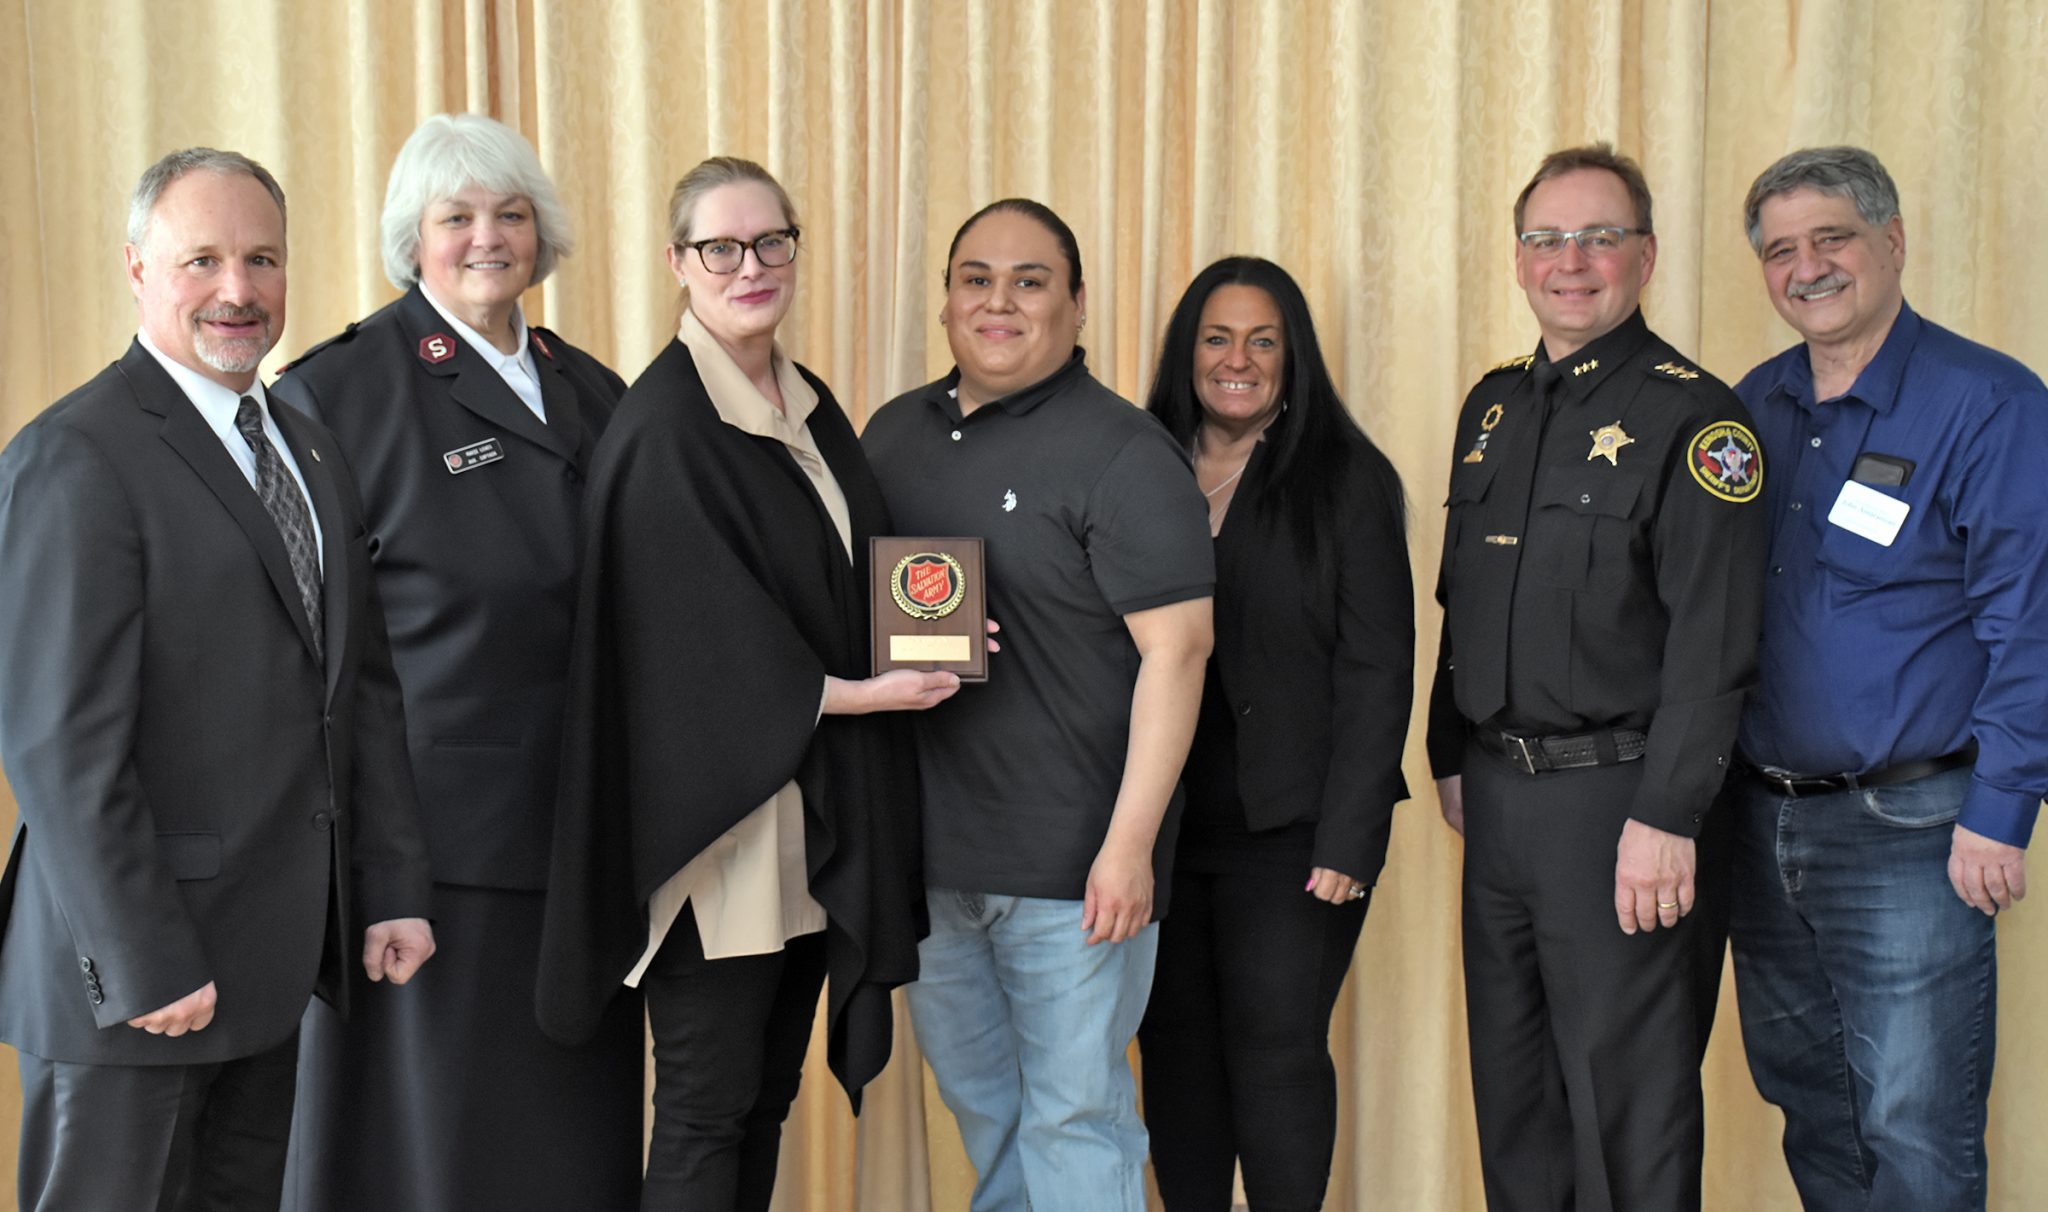 Centrisys Receives Award From Salvation Army